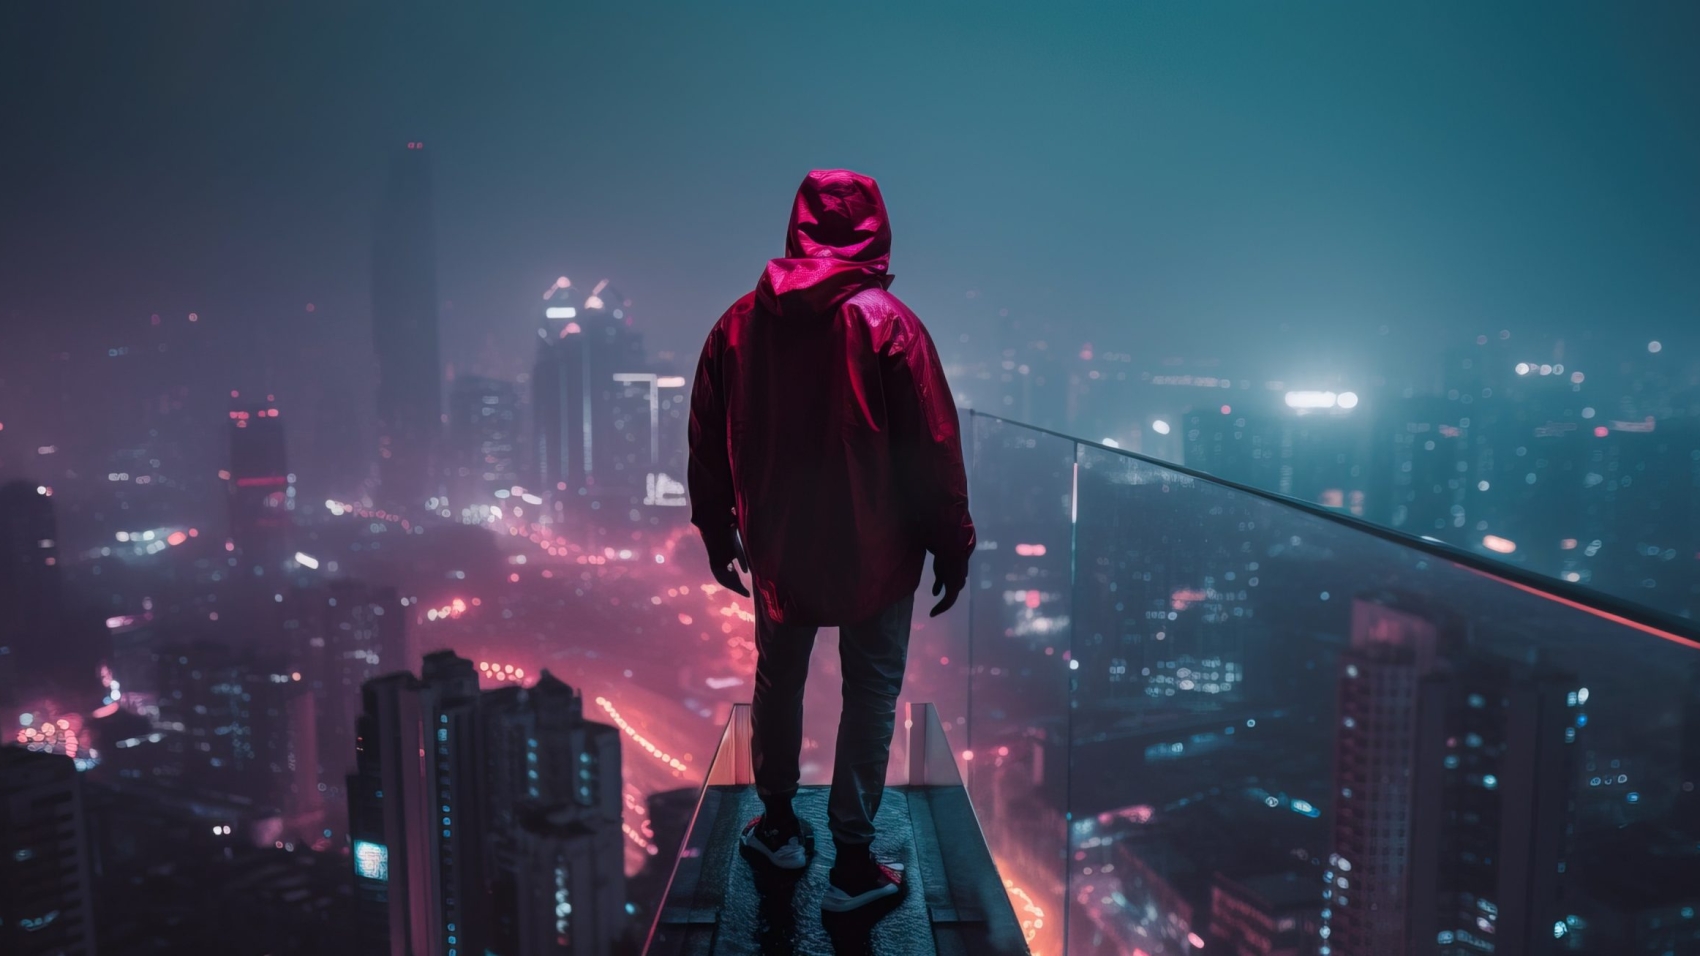 A man in a futuristic hooded jacket stands on top of a skyscrape